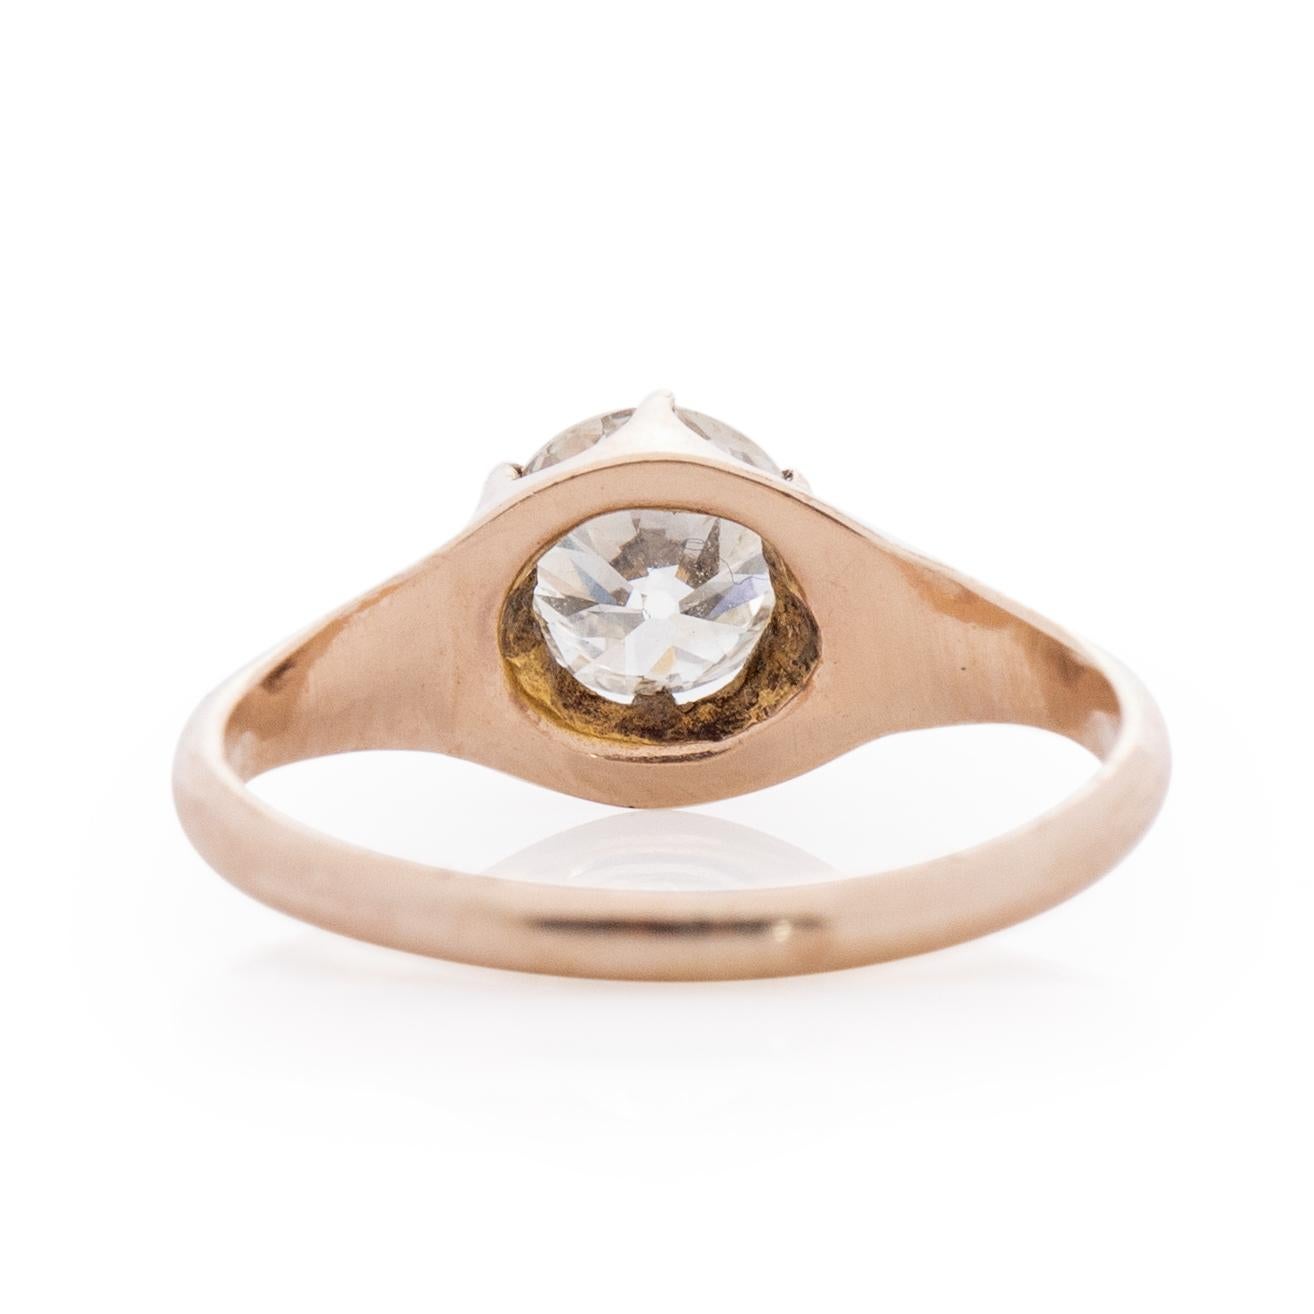 Old European Cut Victorian Yellow Gold .90 Carat Solitaire Ring with GIA Graded Diamond